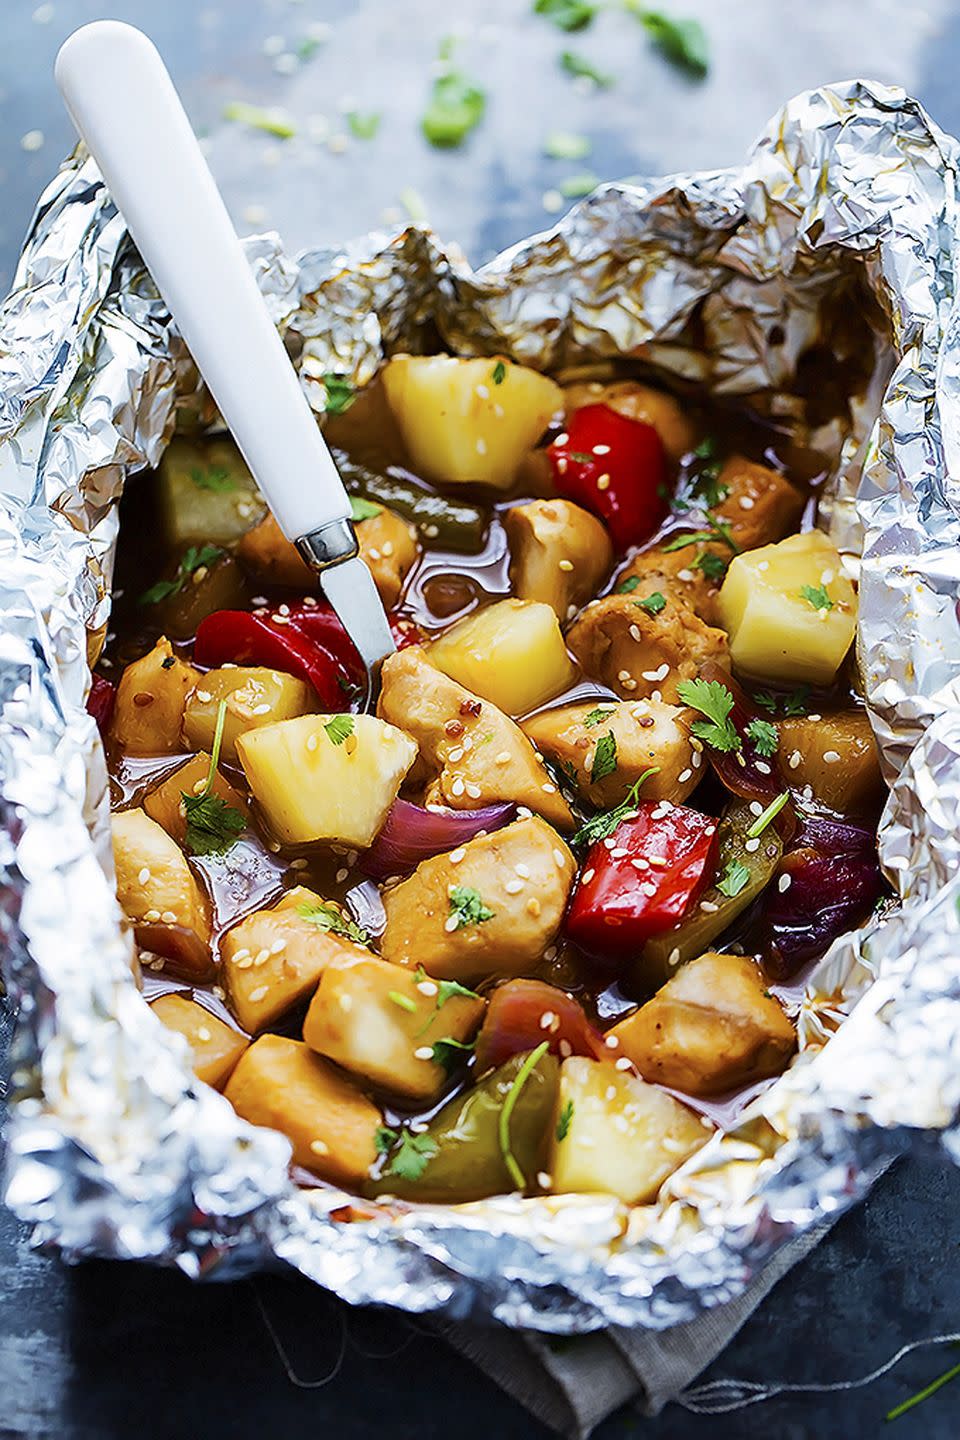 These Foil Pack Chicken Recipes Are the No-Mess Dinners You've Been Looking For